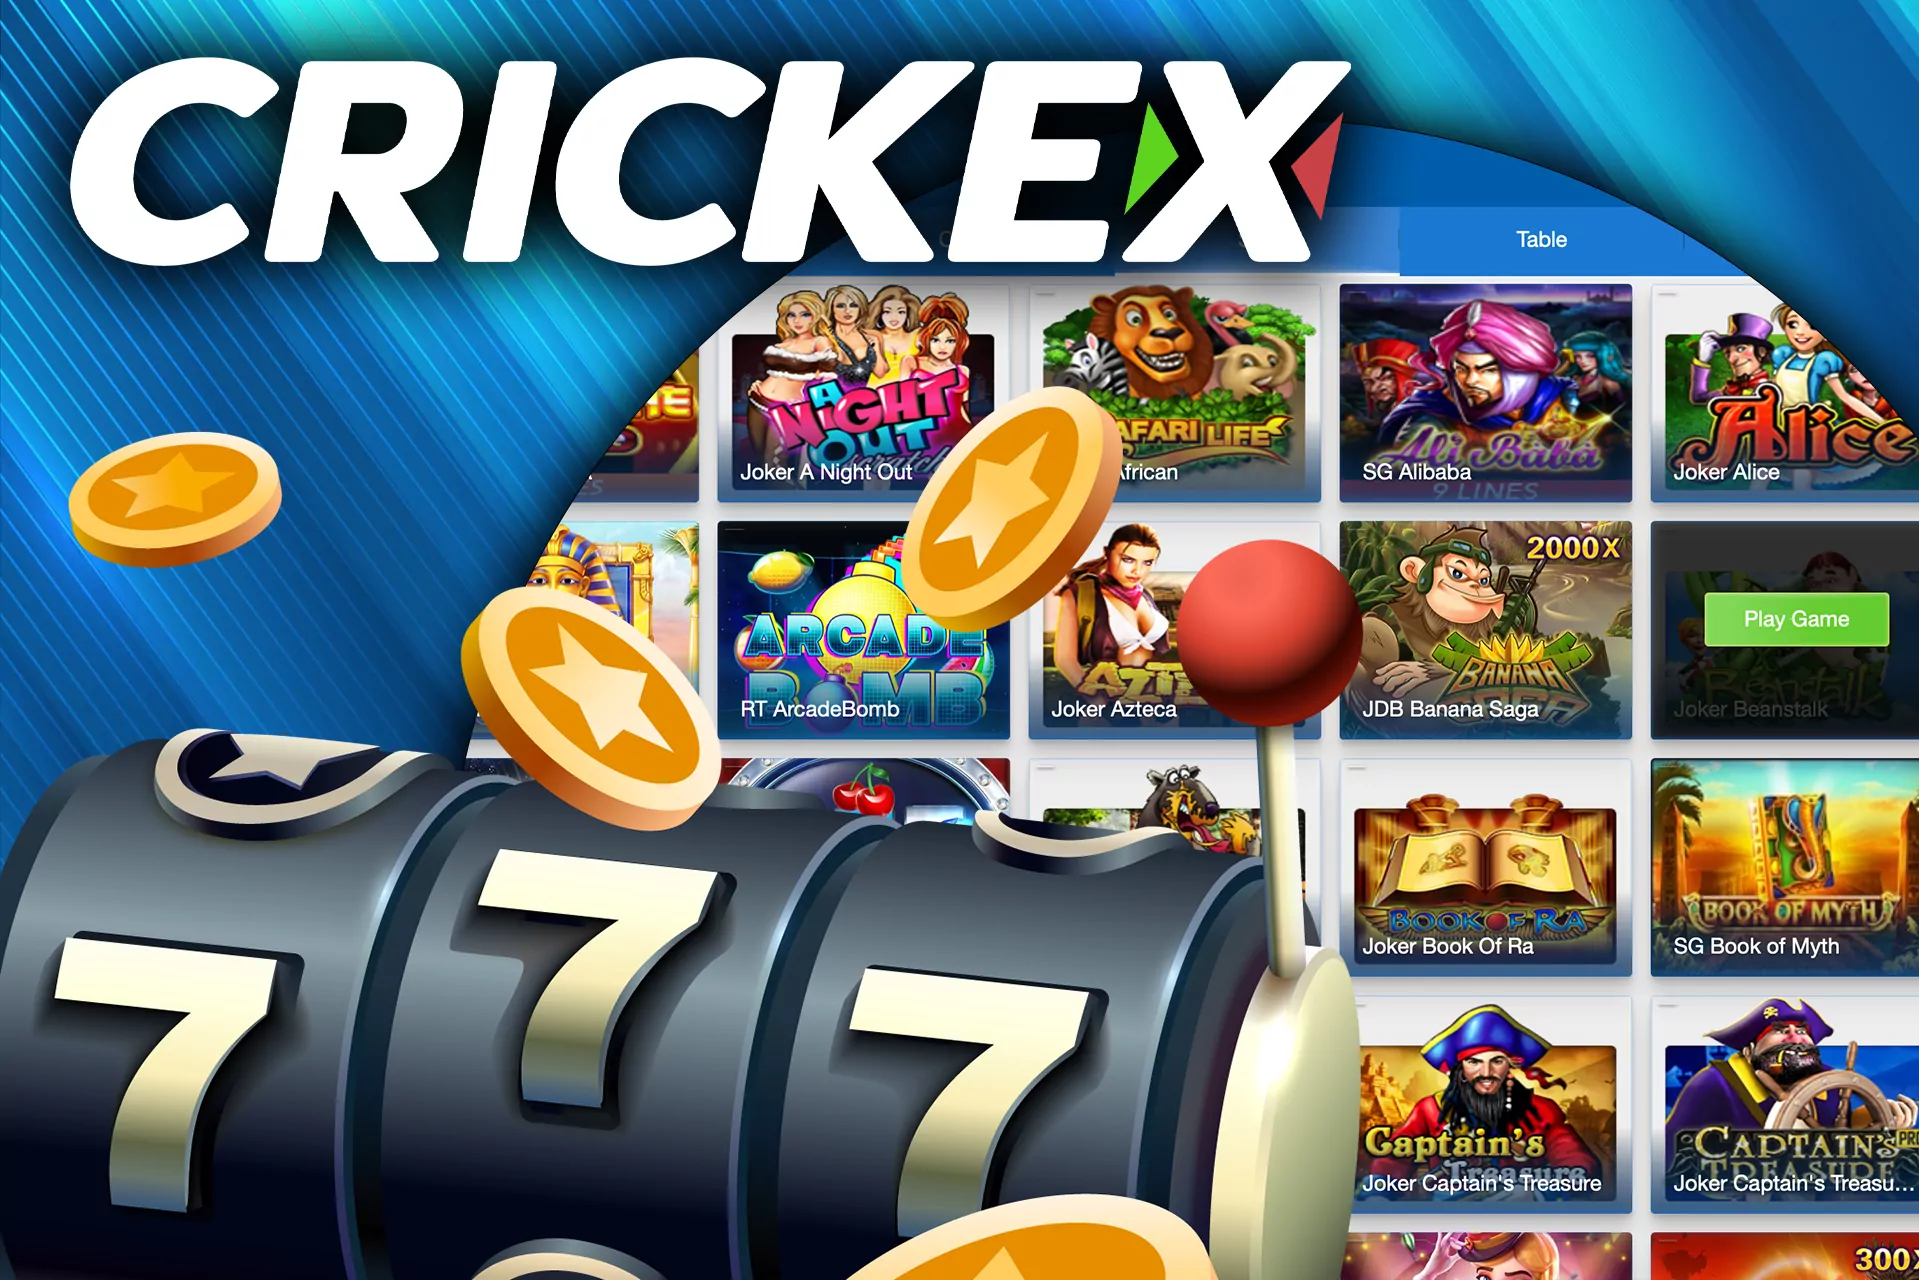 Slots is the most well-known game in the Crickex casino.